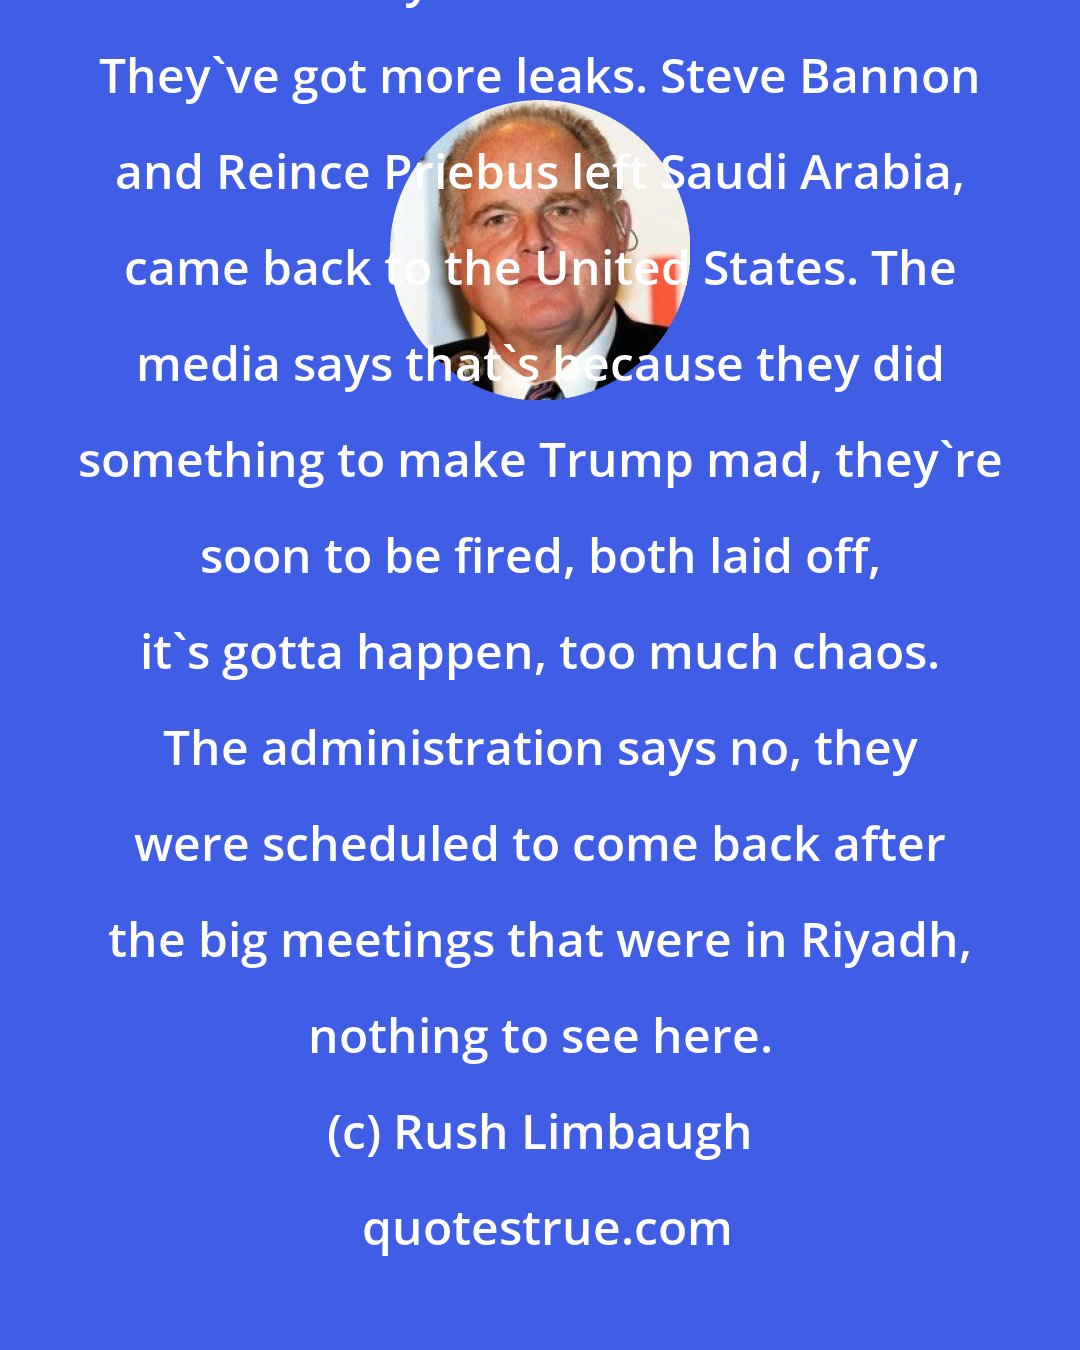 Rush Limbaugh: James Comey is gonna single-handedly get Donald Trump impeached. They can't wait. They're all beside themselves. They've got more leaks. Steve Bannon and Reince Priebus left Saudi Arabia, came back to the United States. The media says that's because they did something to make Trump mad, they're soon to be fired, both laid off, it's gotta happen, too much chaos. The administration says no, they were scheduled to come back after the big meetings that were in Riyadh, nothing to see here.